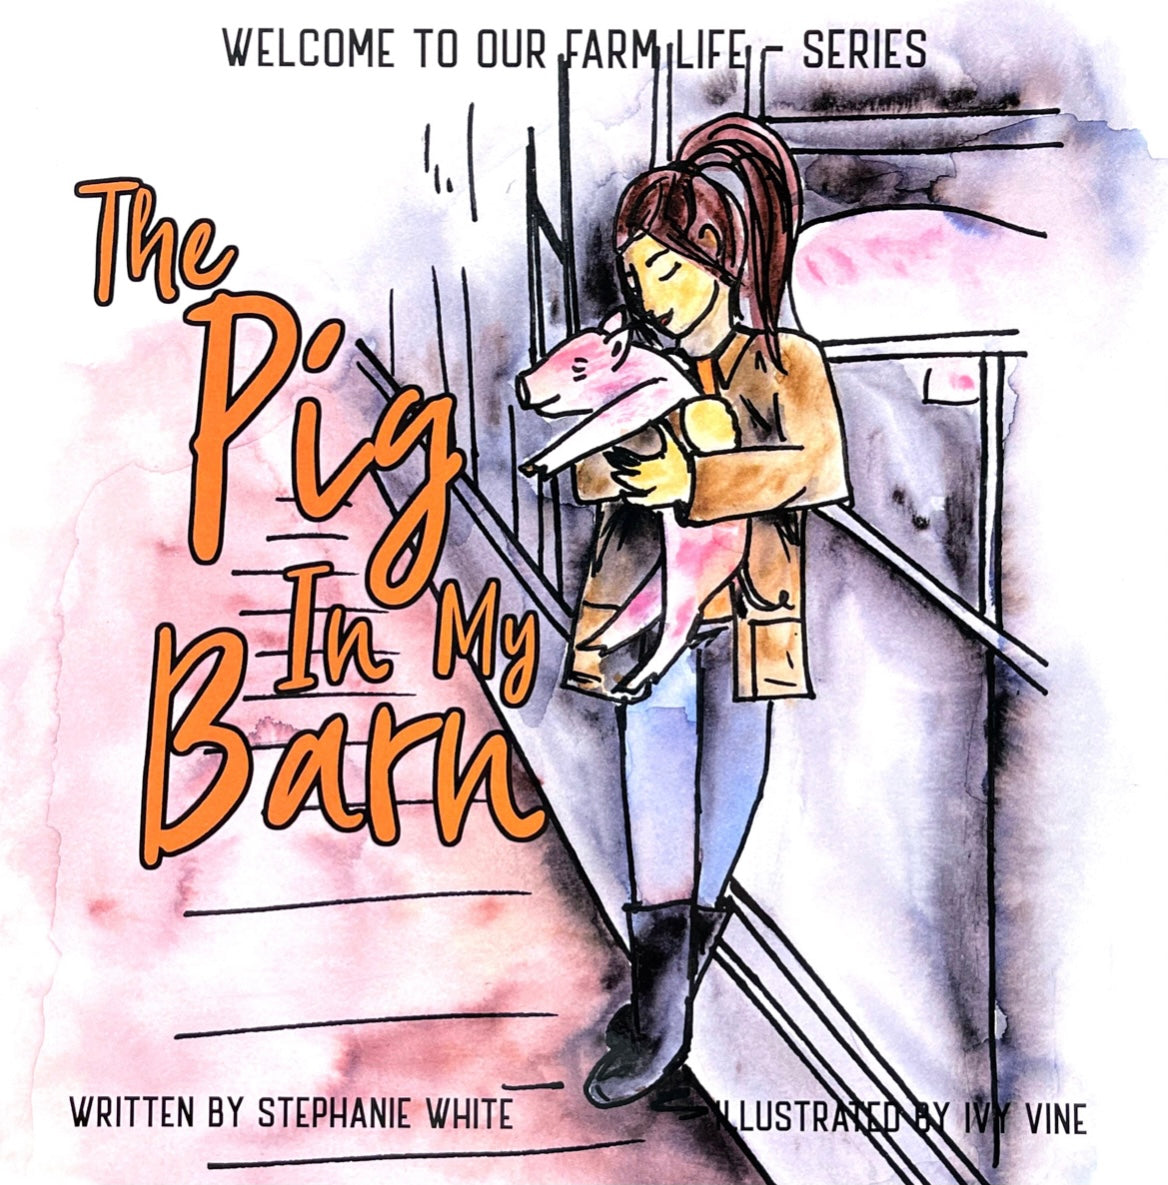 THE PIG IN MY BARN CHILDRENS BOOK